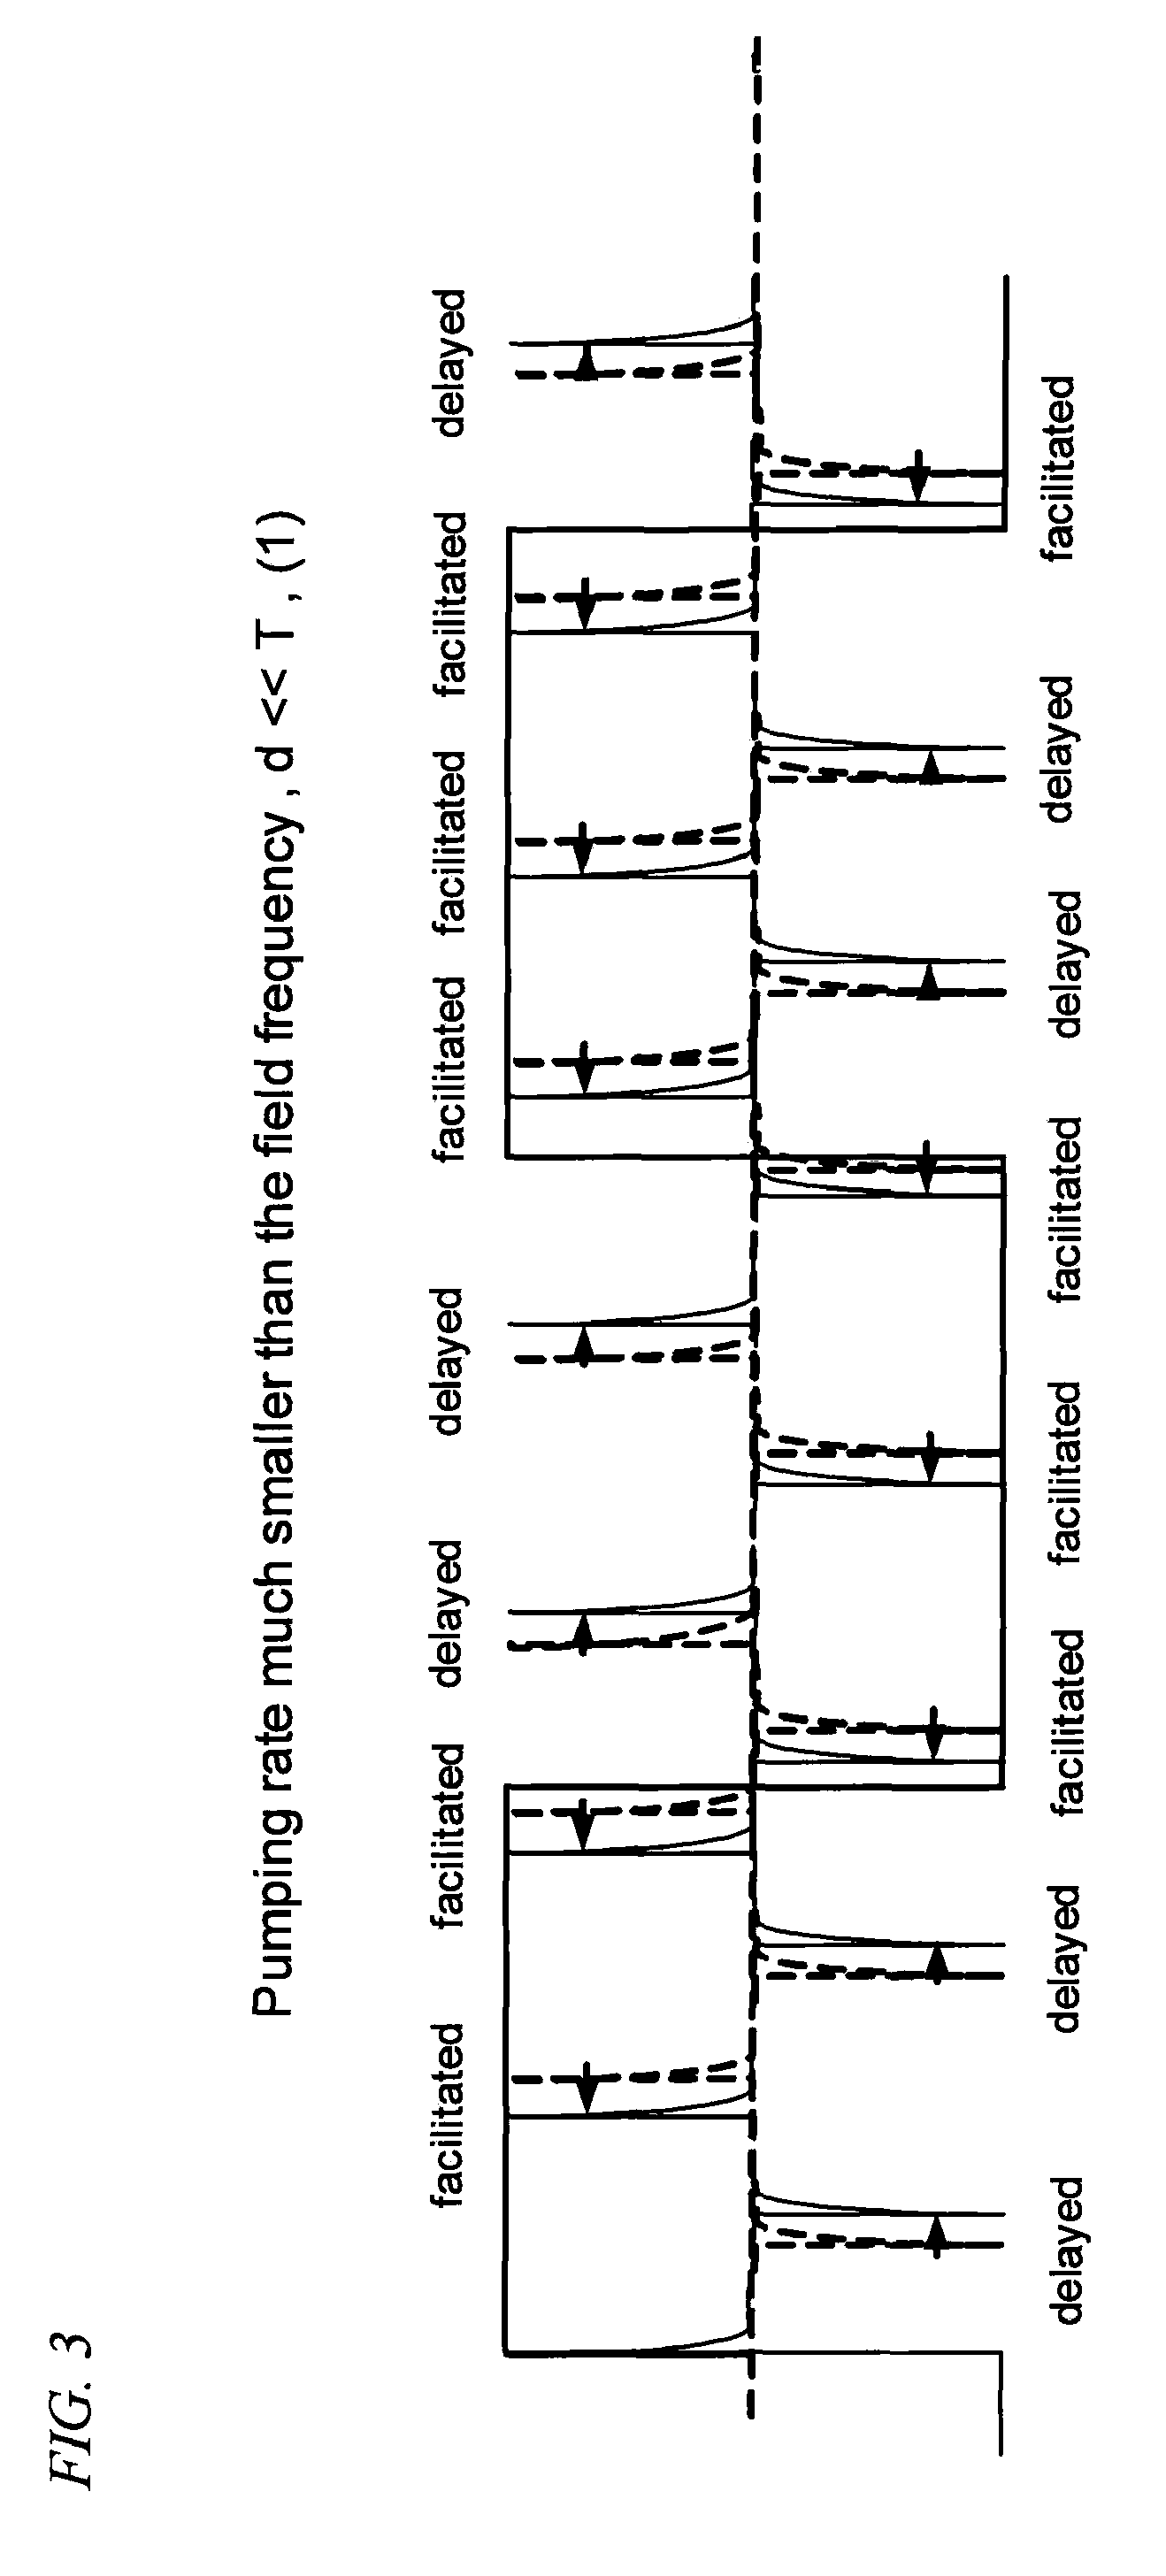 Method of electrogenically controlling pump molecules